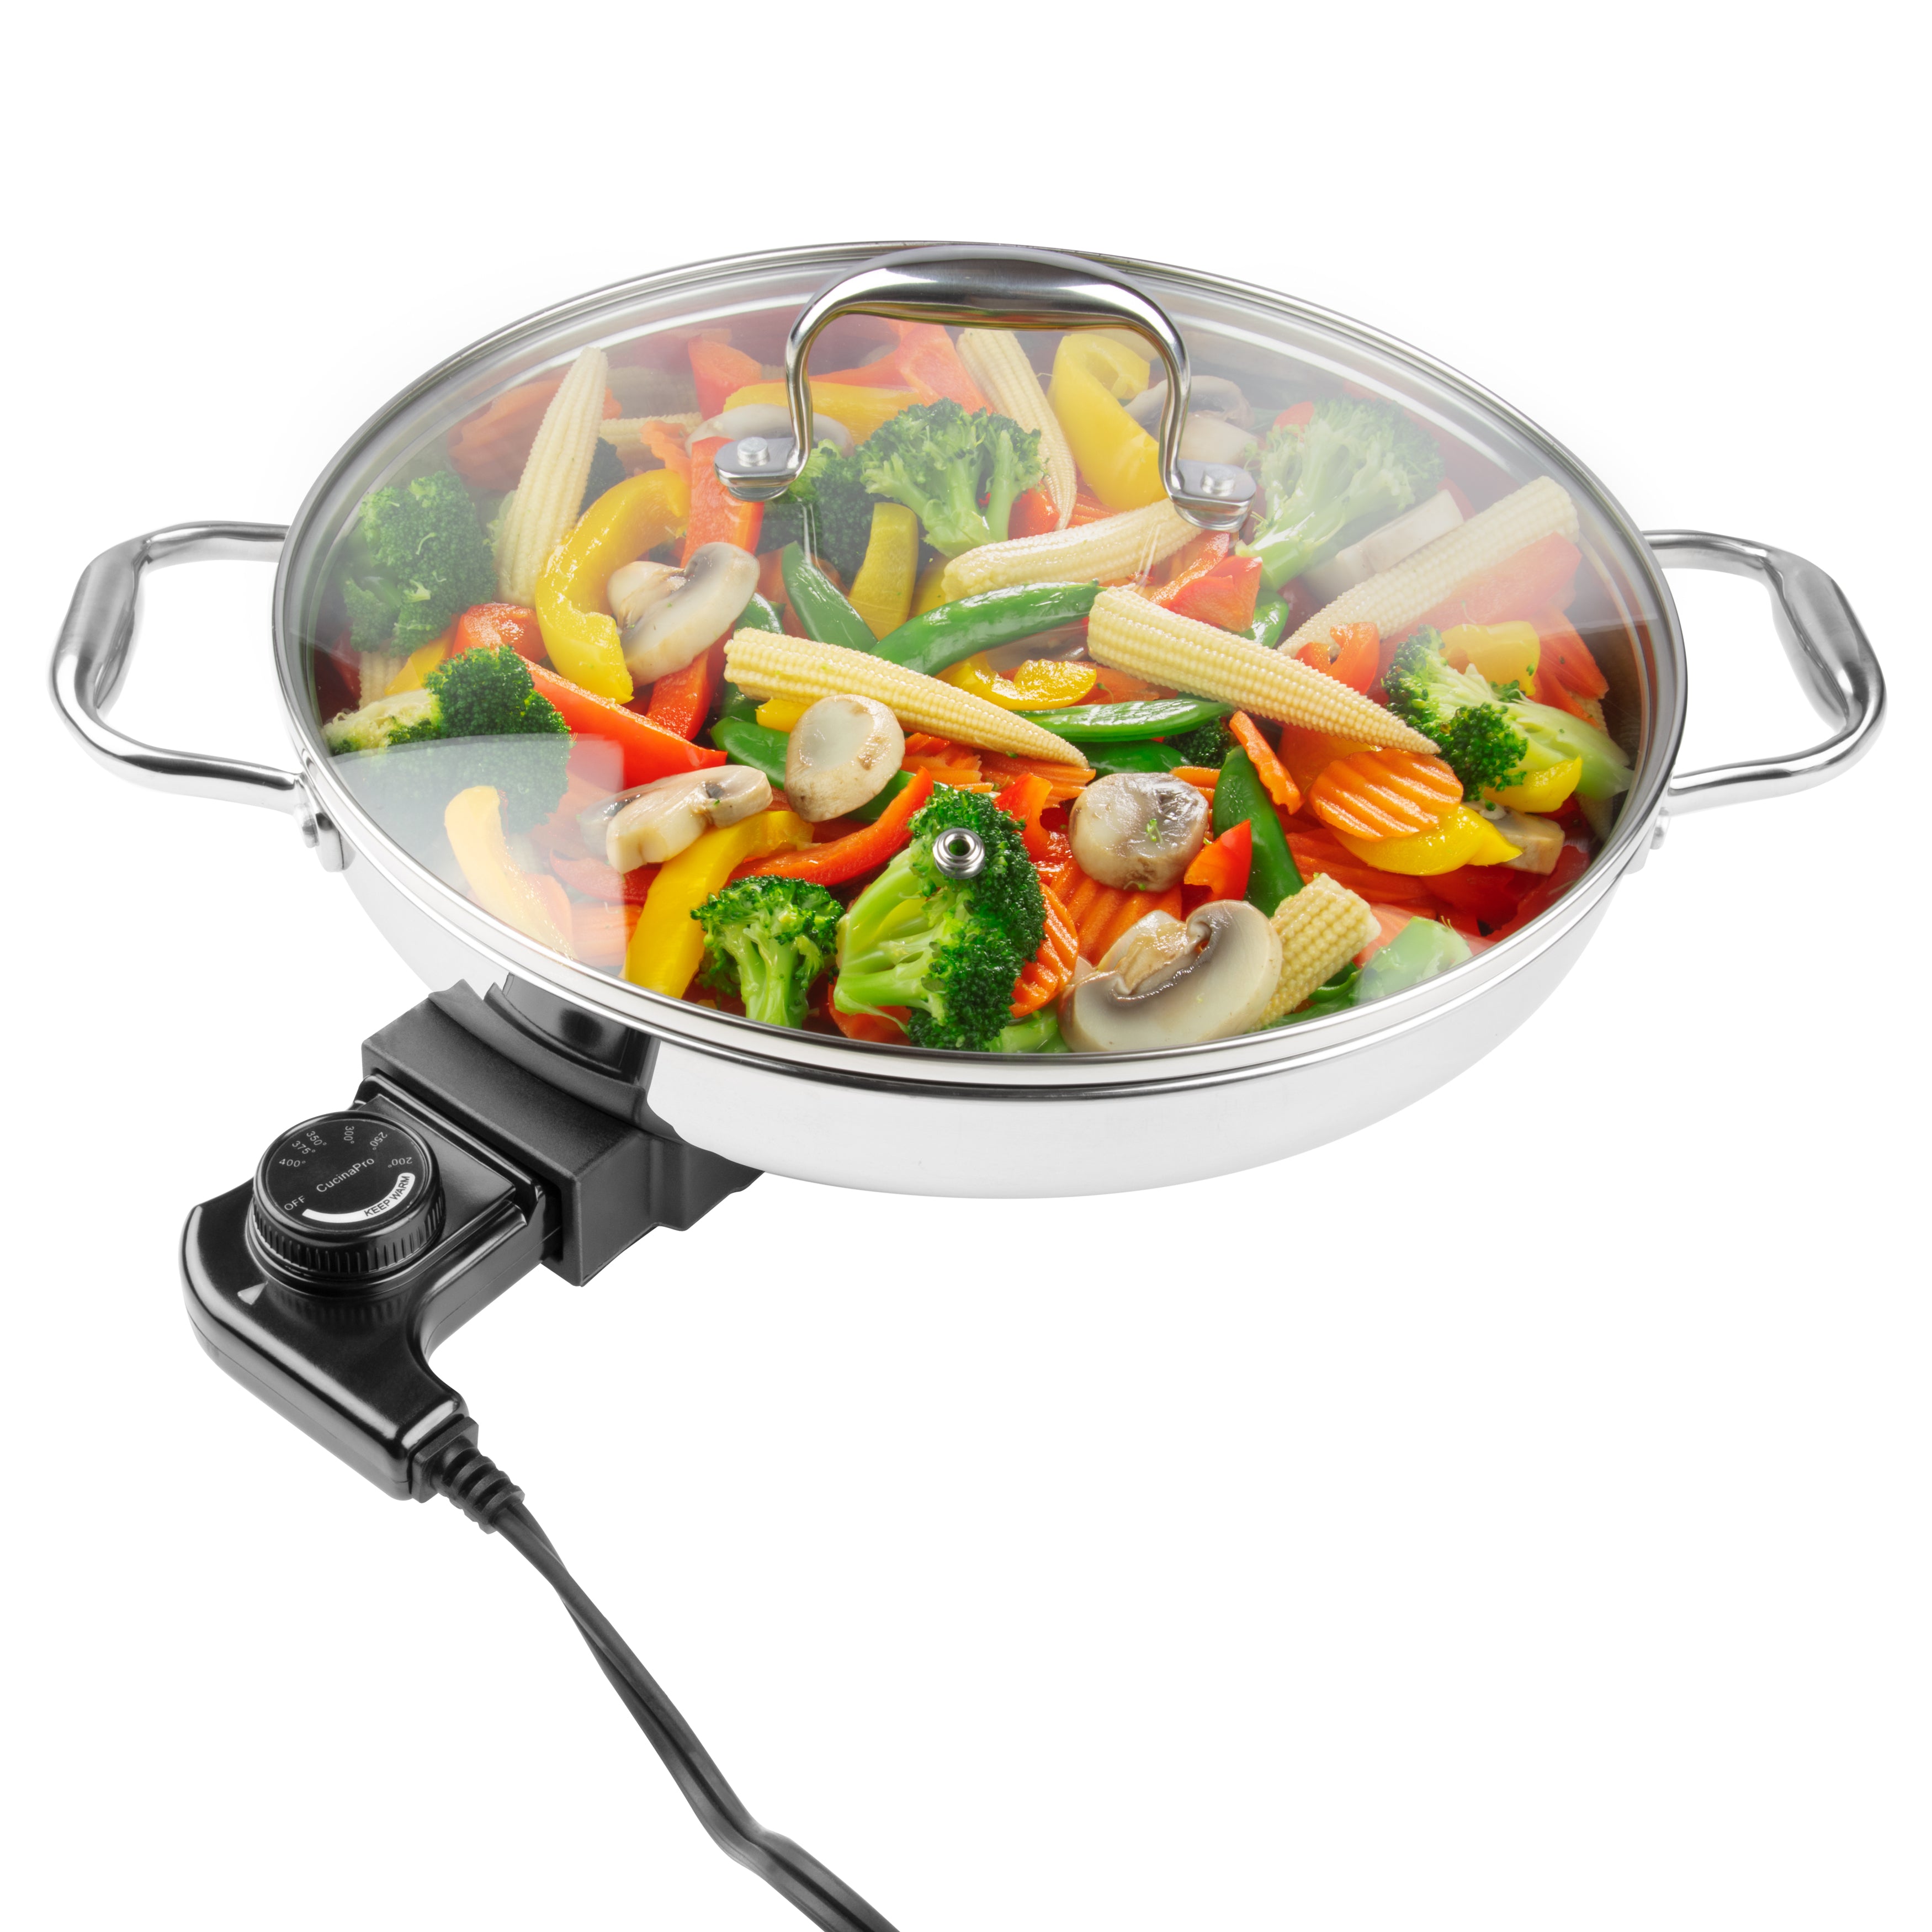 Extra Deep Electric Skillet Nonstick - 16 Inch Frying Pan With Glass lid,  Server for 4 Perple or Family, for Frying, Steaming, Boiling, Easy to